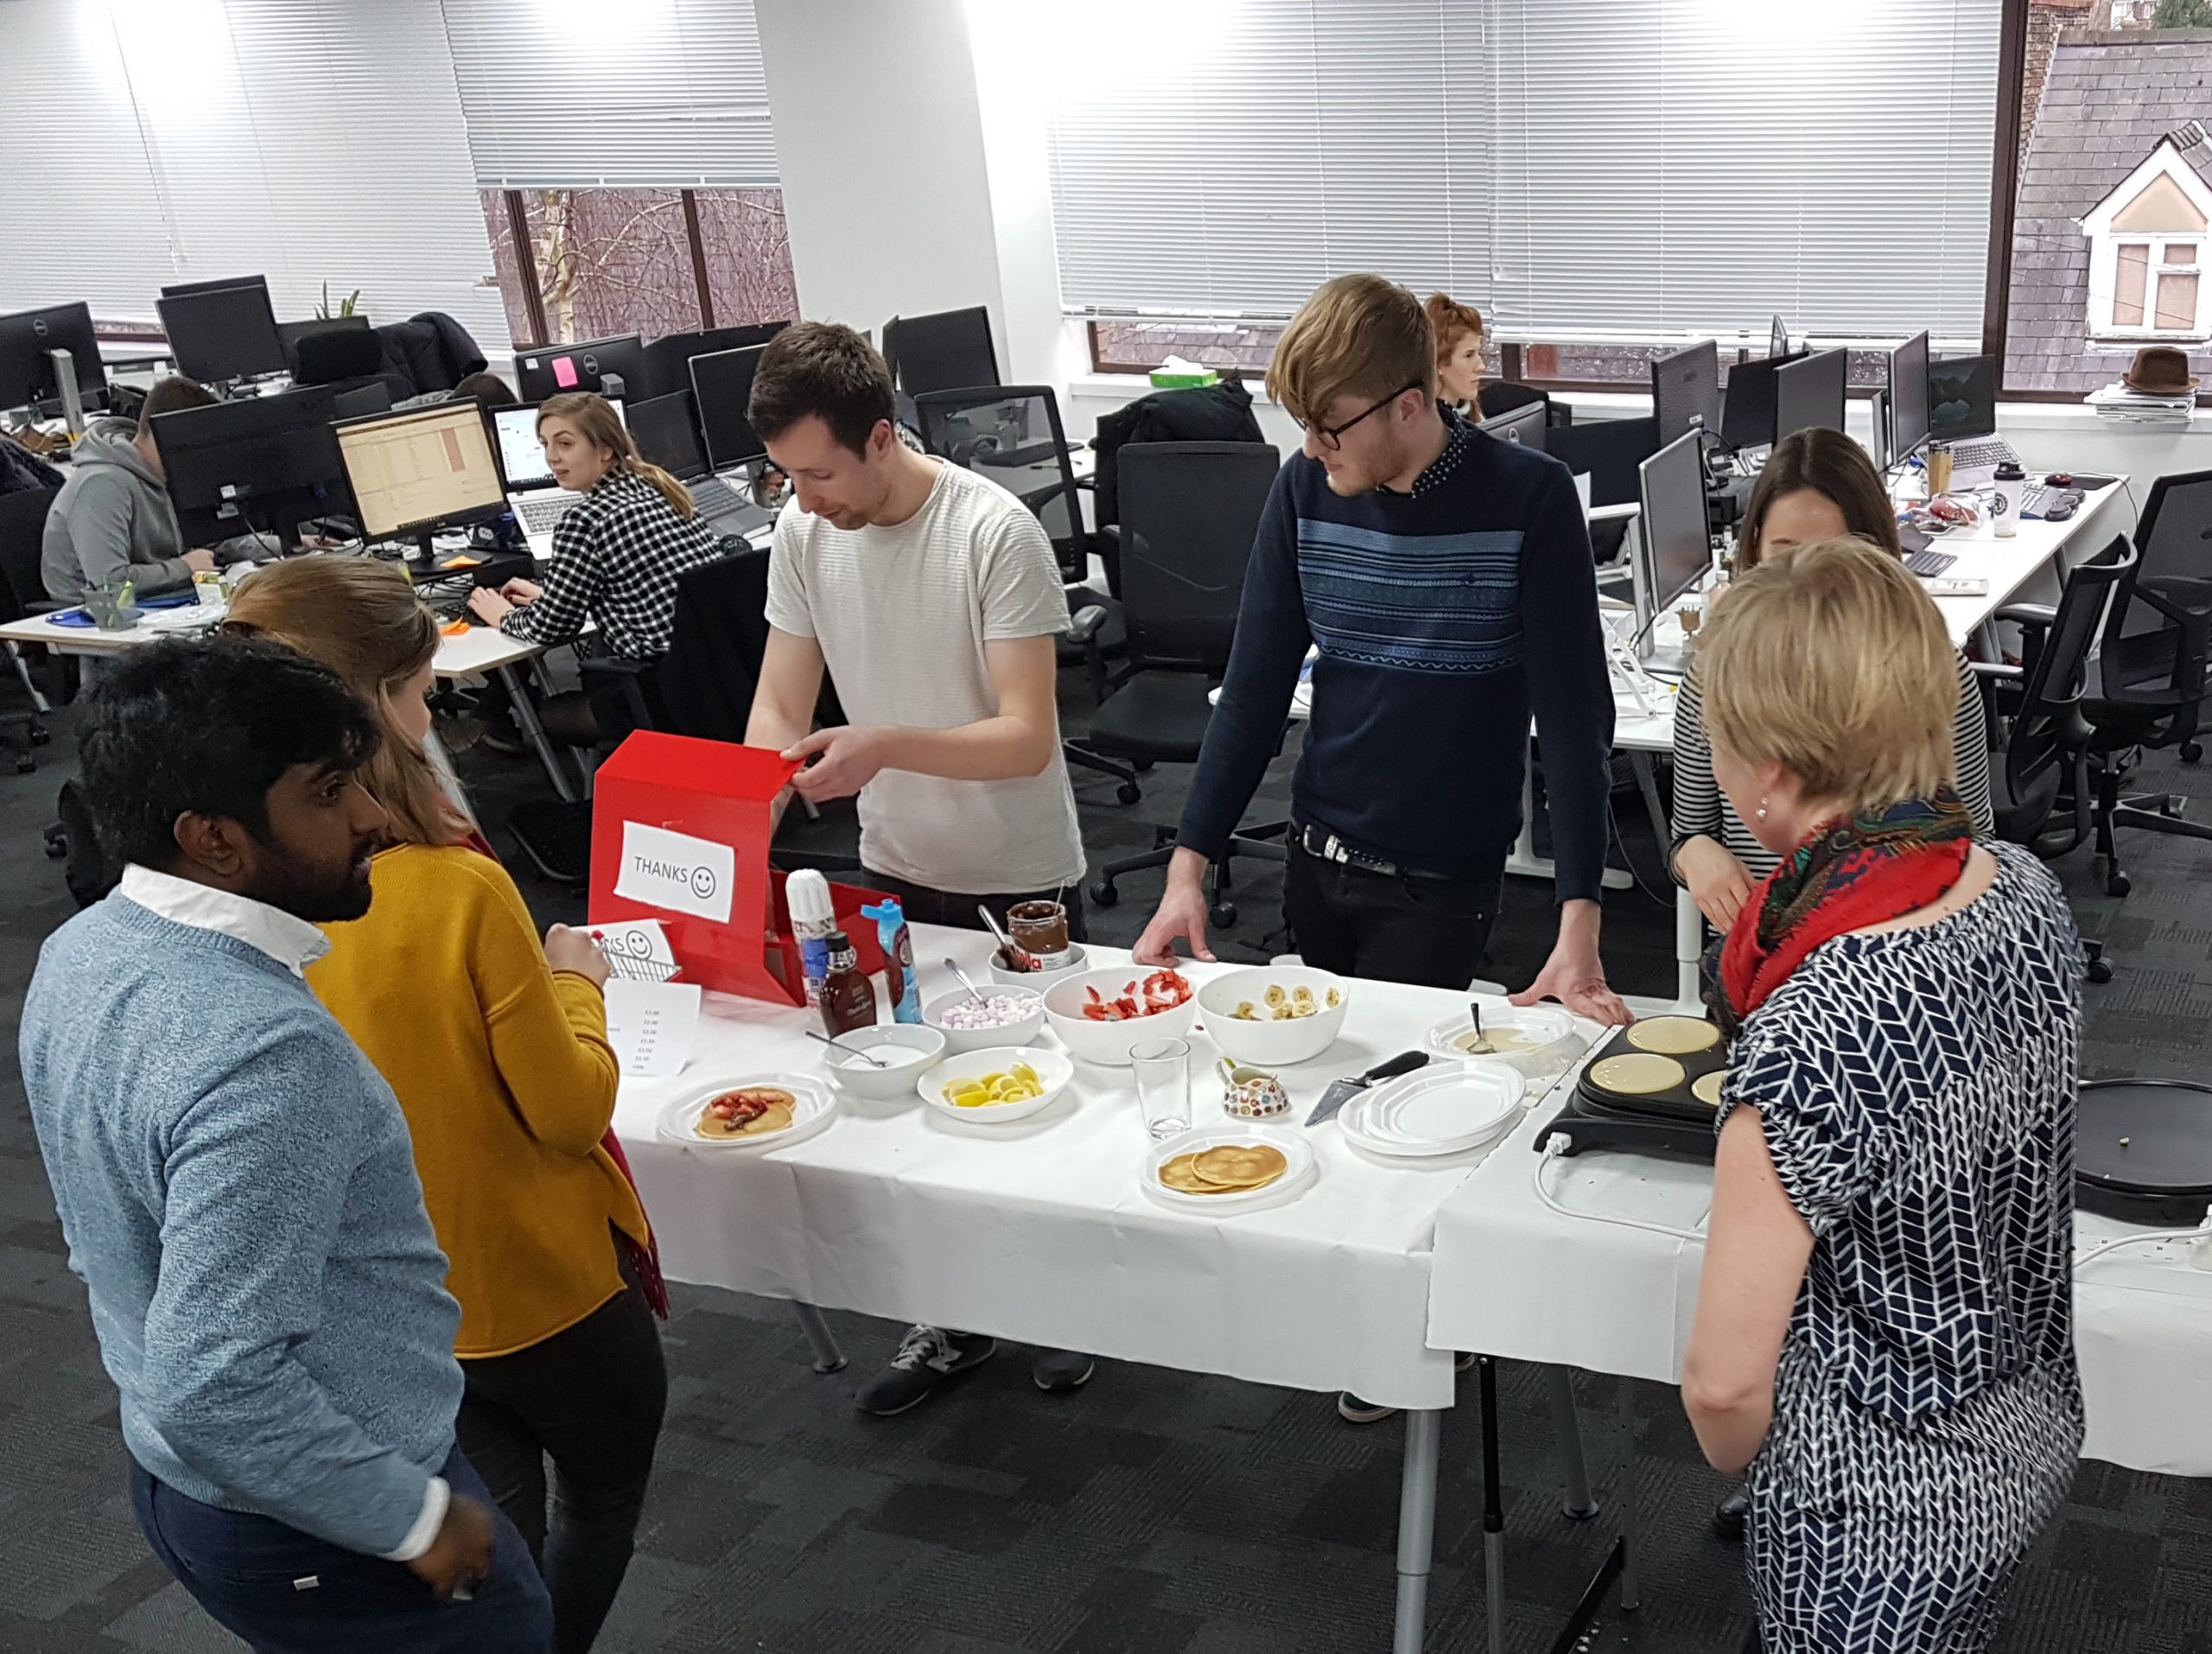 Office staff at Genie fundraise for CAMFED by holding a pancake sale